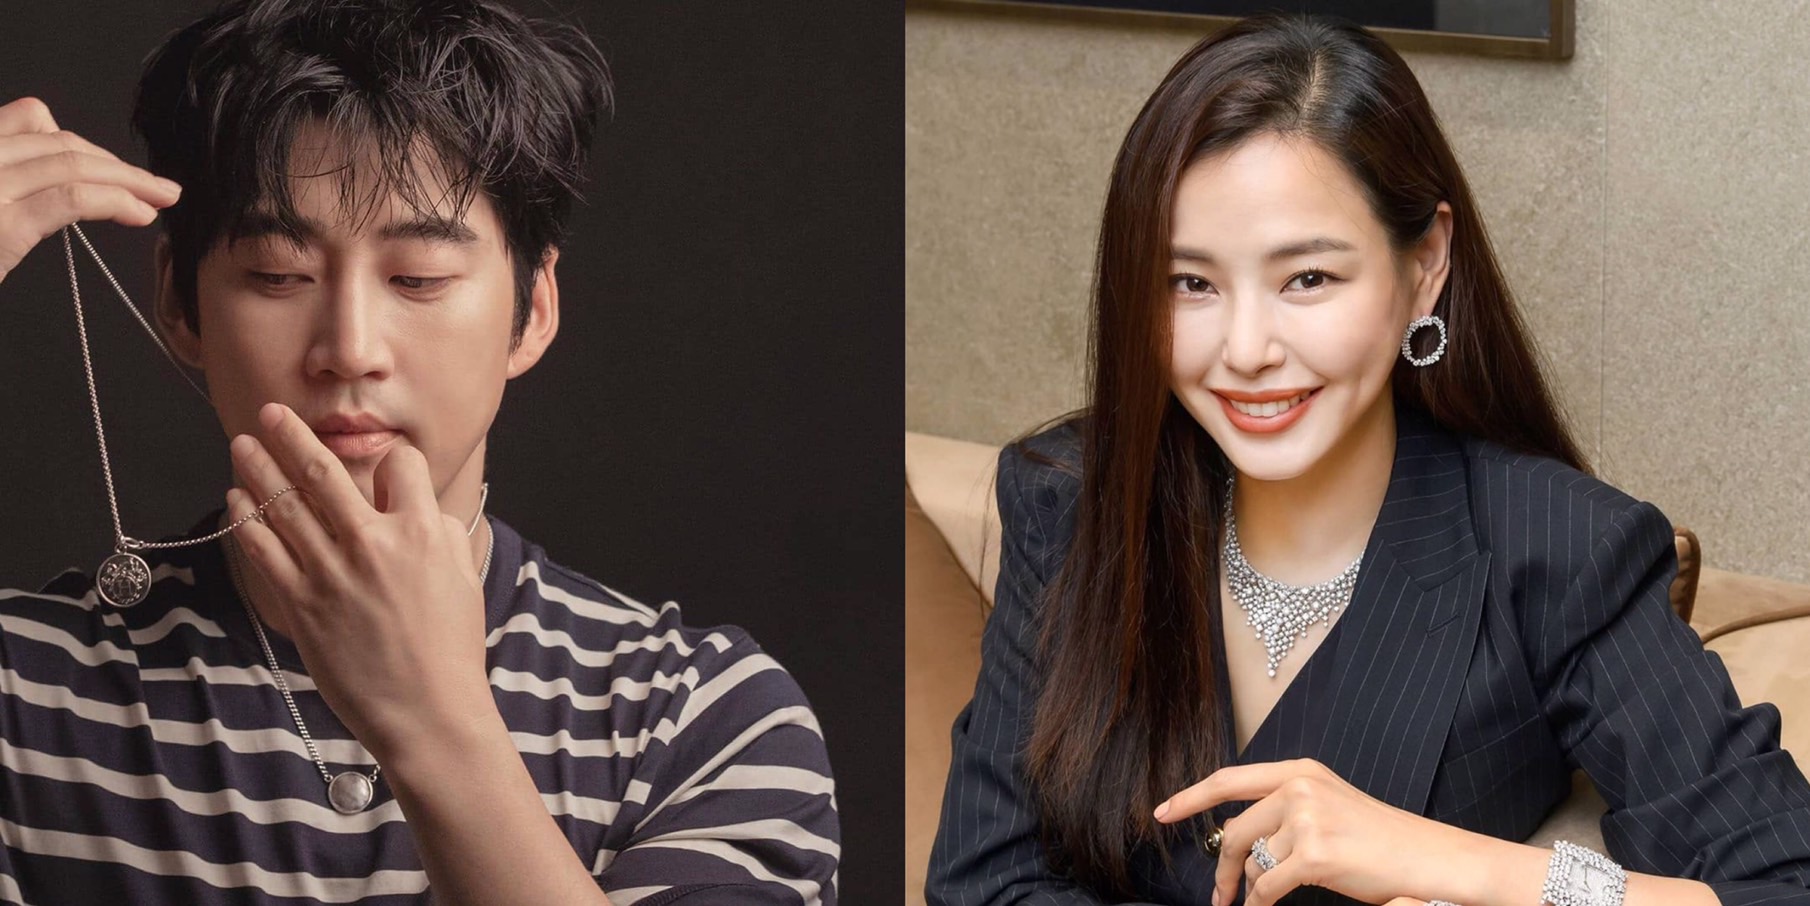 Facts of Honey Lee and Yoon Kye Sang's Love Story that Ended After 7 Years, Both Choose Non-Celebrity Partners